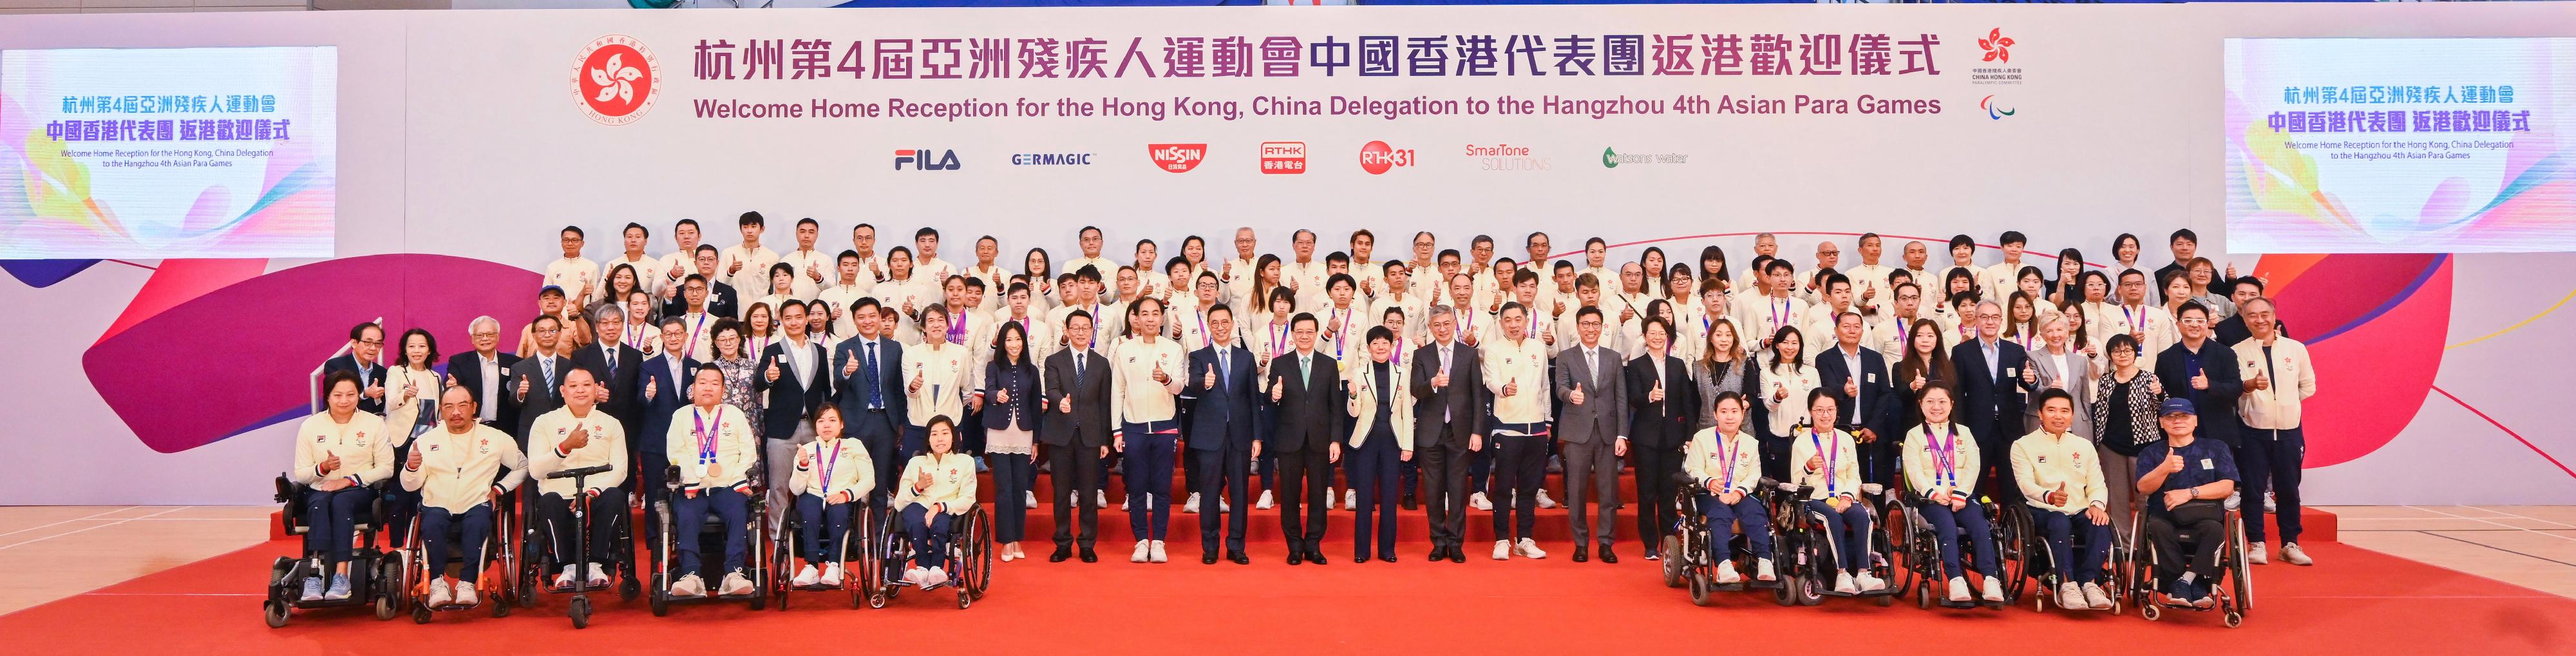 The Chief Executive, Mr John Lee, attended the welcome home reception for the Hong Kong, China Delegation from the 4th Asian Para Games Hangzhou today (November 13). Photo shows (second row, from 12th left) the Director of Leisure and Cultural Services, Mr Vincent Liu; the Chef de Mission of the Hong Kong, China Delegation to the Hangzhou 4th Asian Para Games, Mr Jim Luk; the Secretary for Culture, Sports and Tourism, Mr Kevin Yeung; Mr Lee; the President of the China Hong Kong Paralympic Committee, Mrs Jenny Fung, and other guests with athletes.